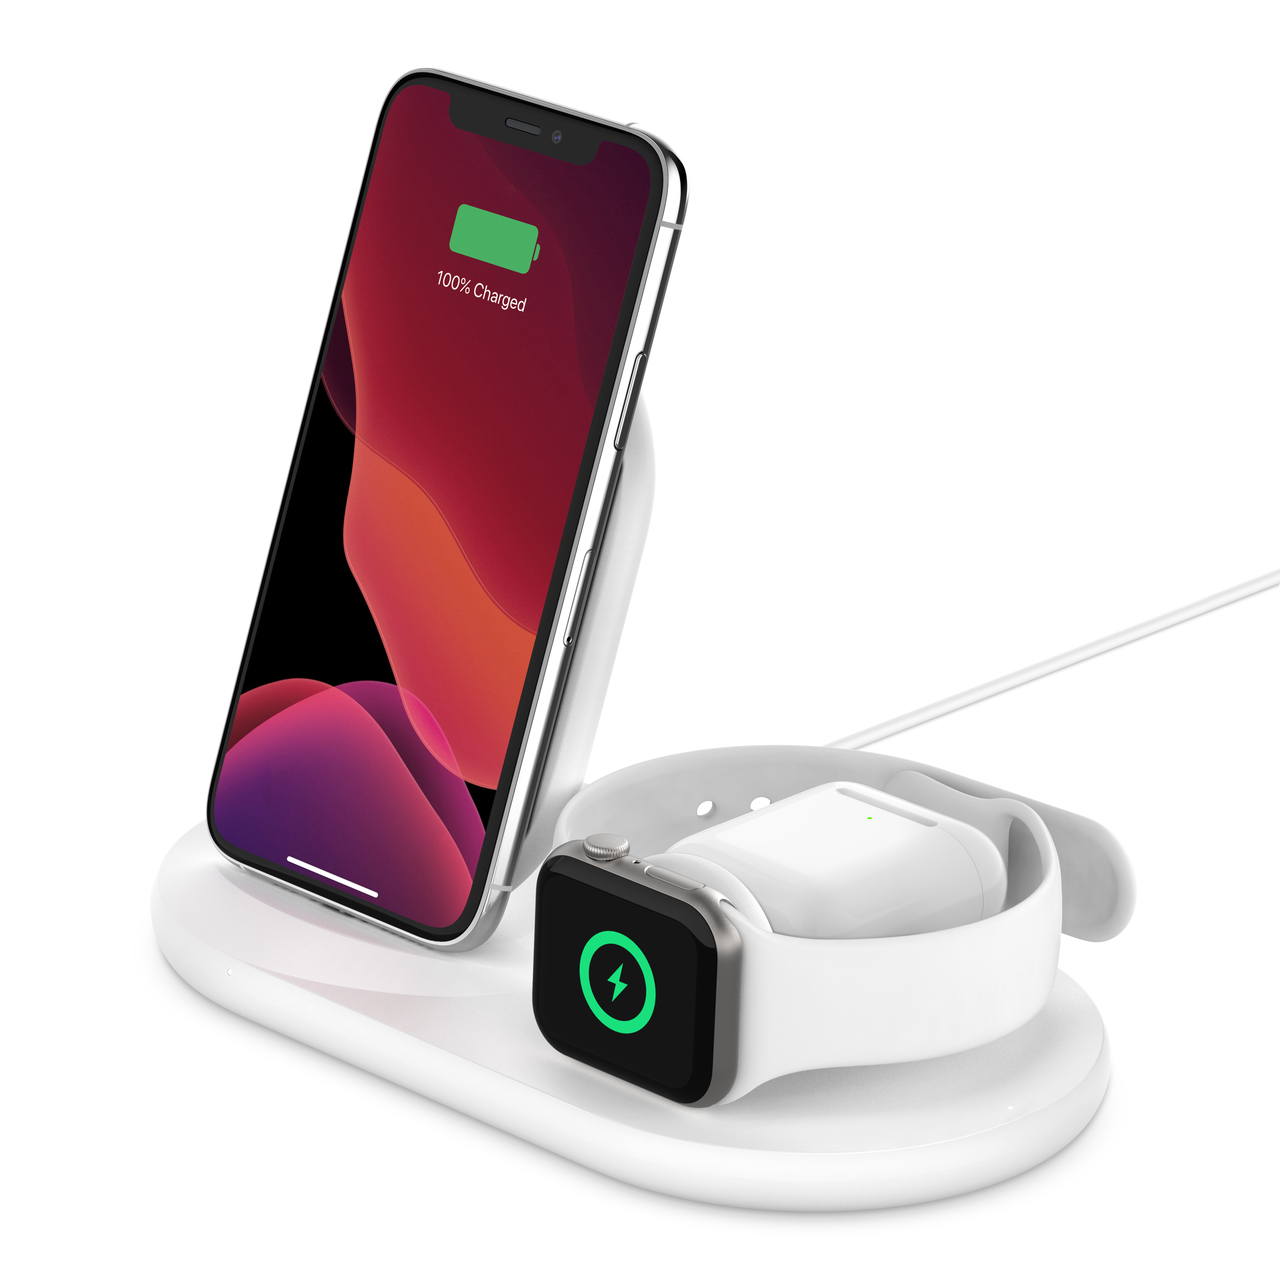 Belkin BoostCharge 3-in-1 Apple Wireless Charger in White